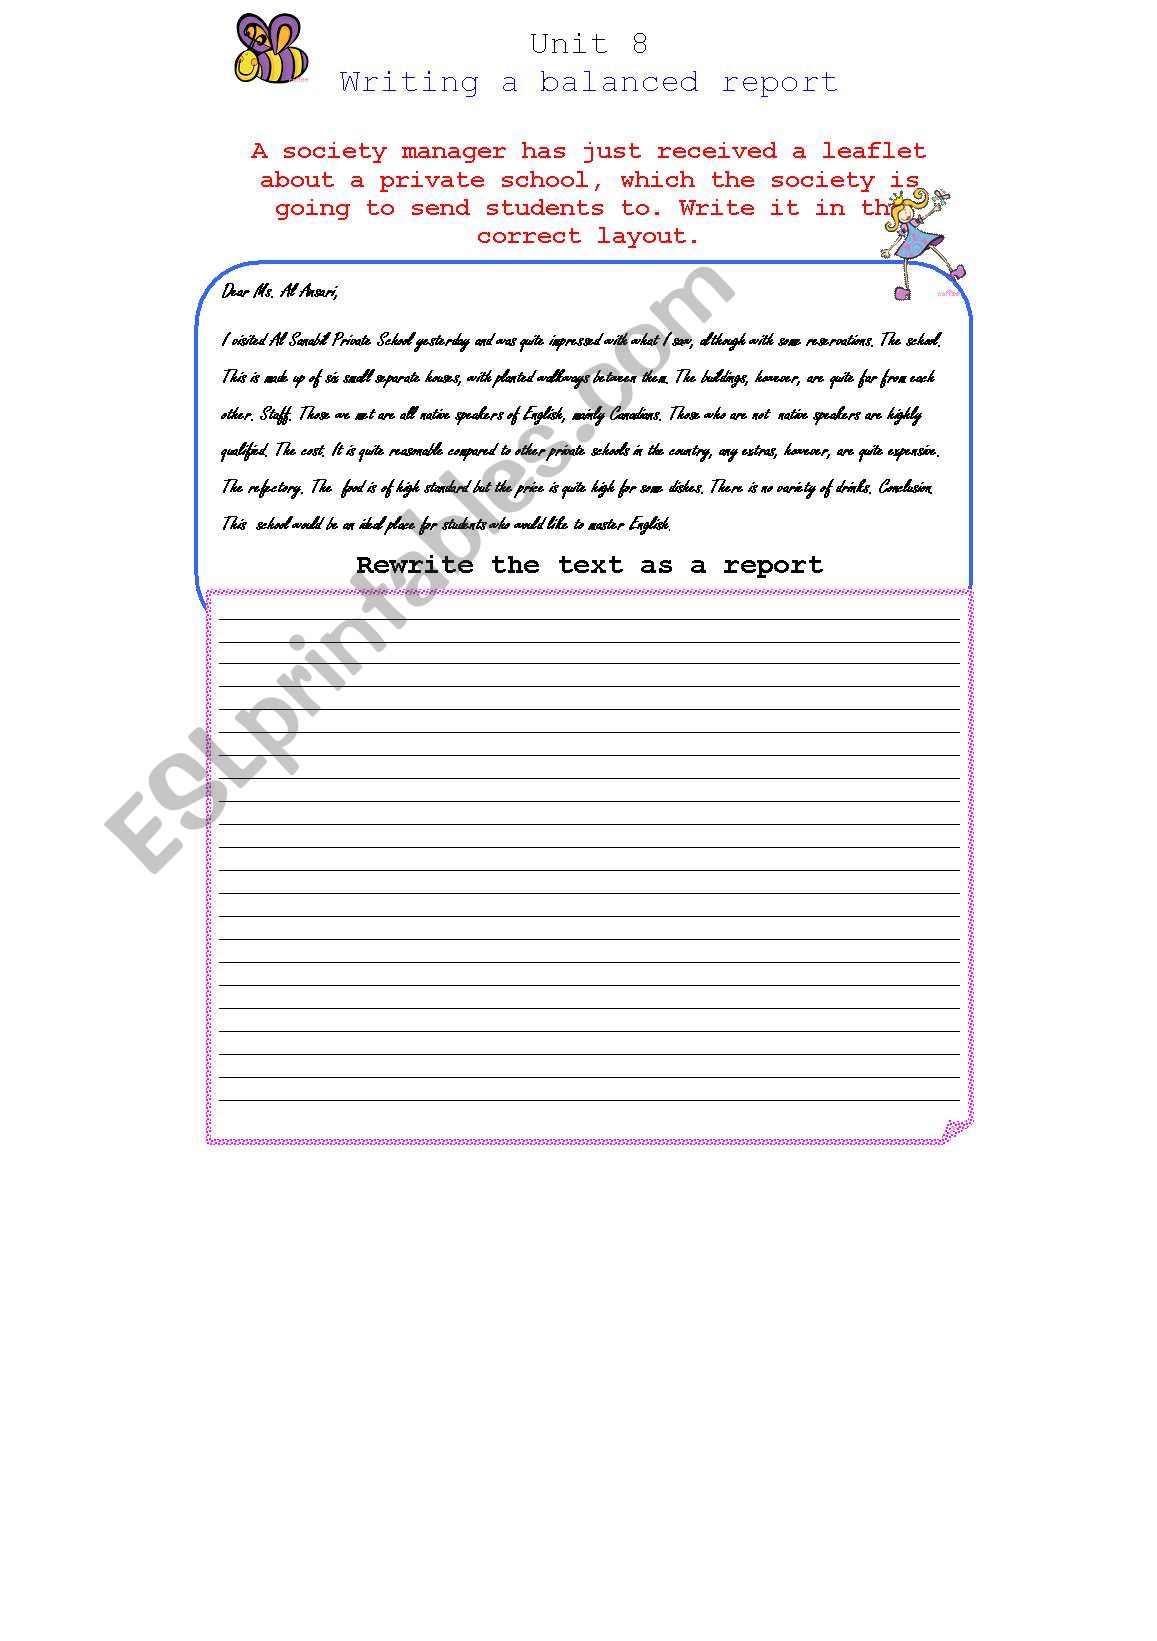 writing a report worksheet